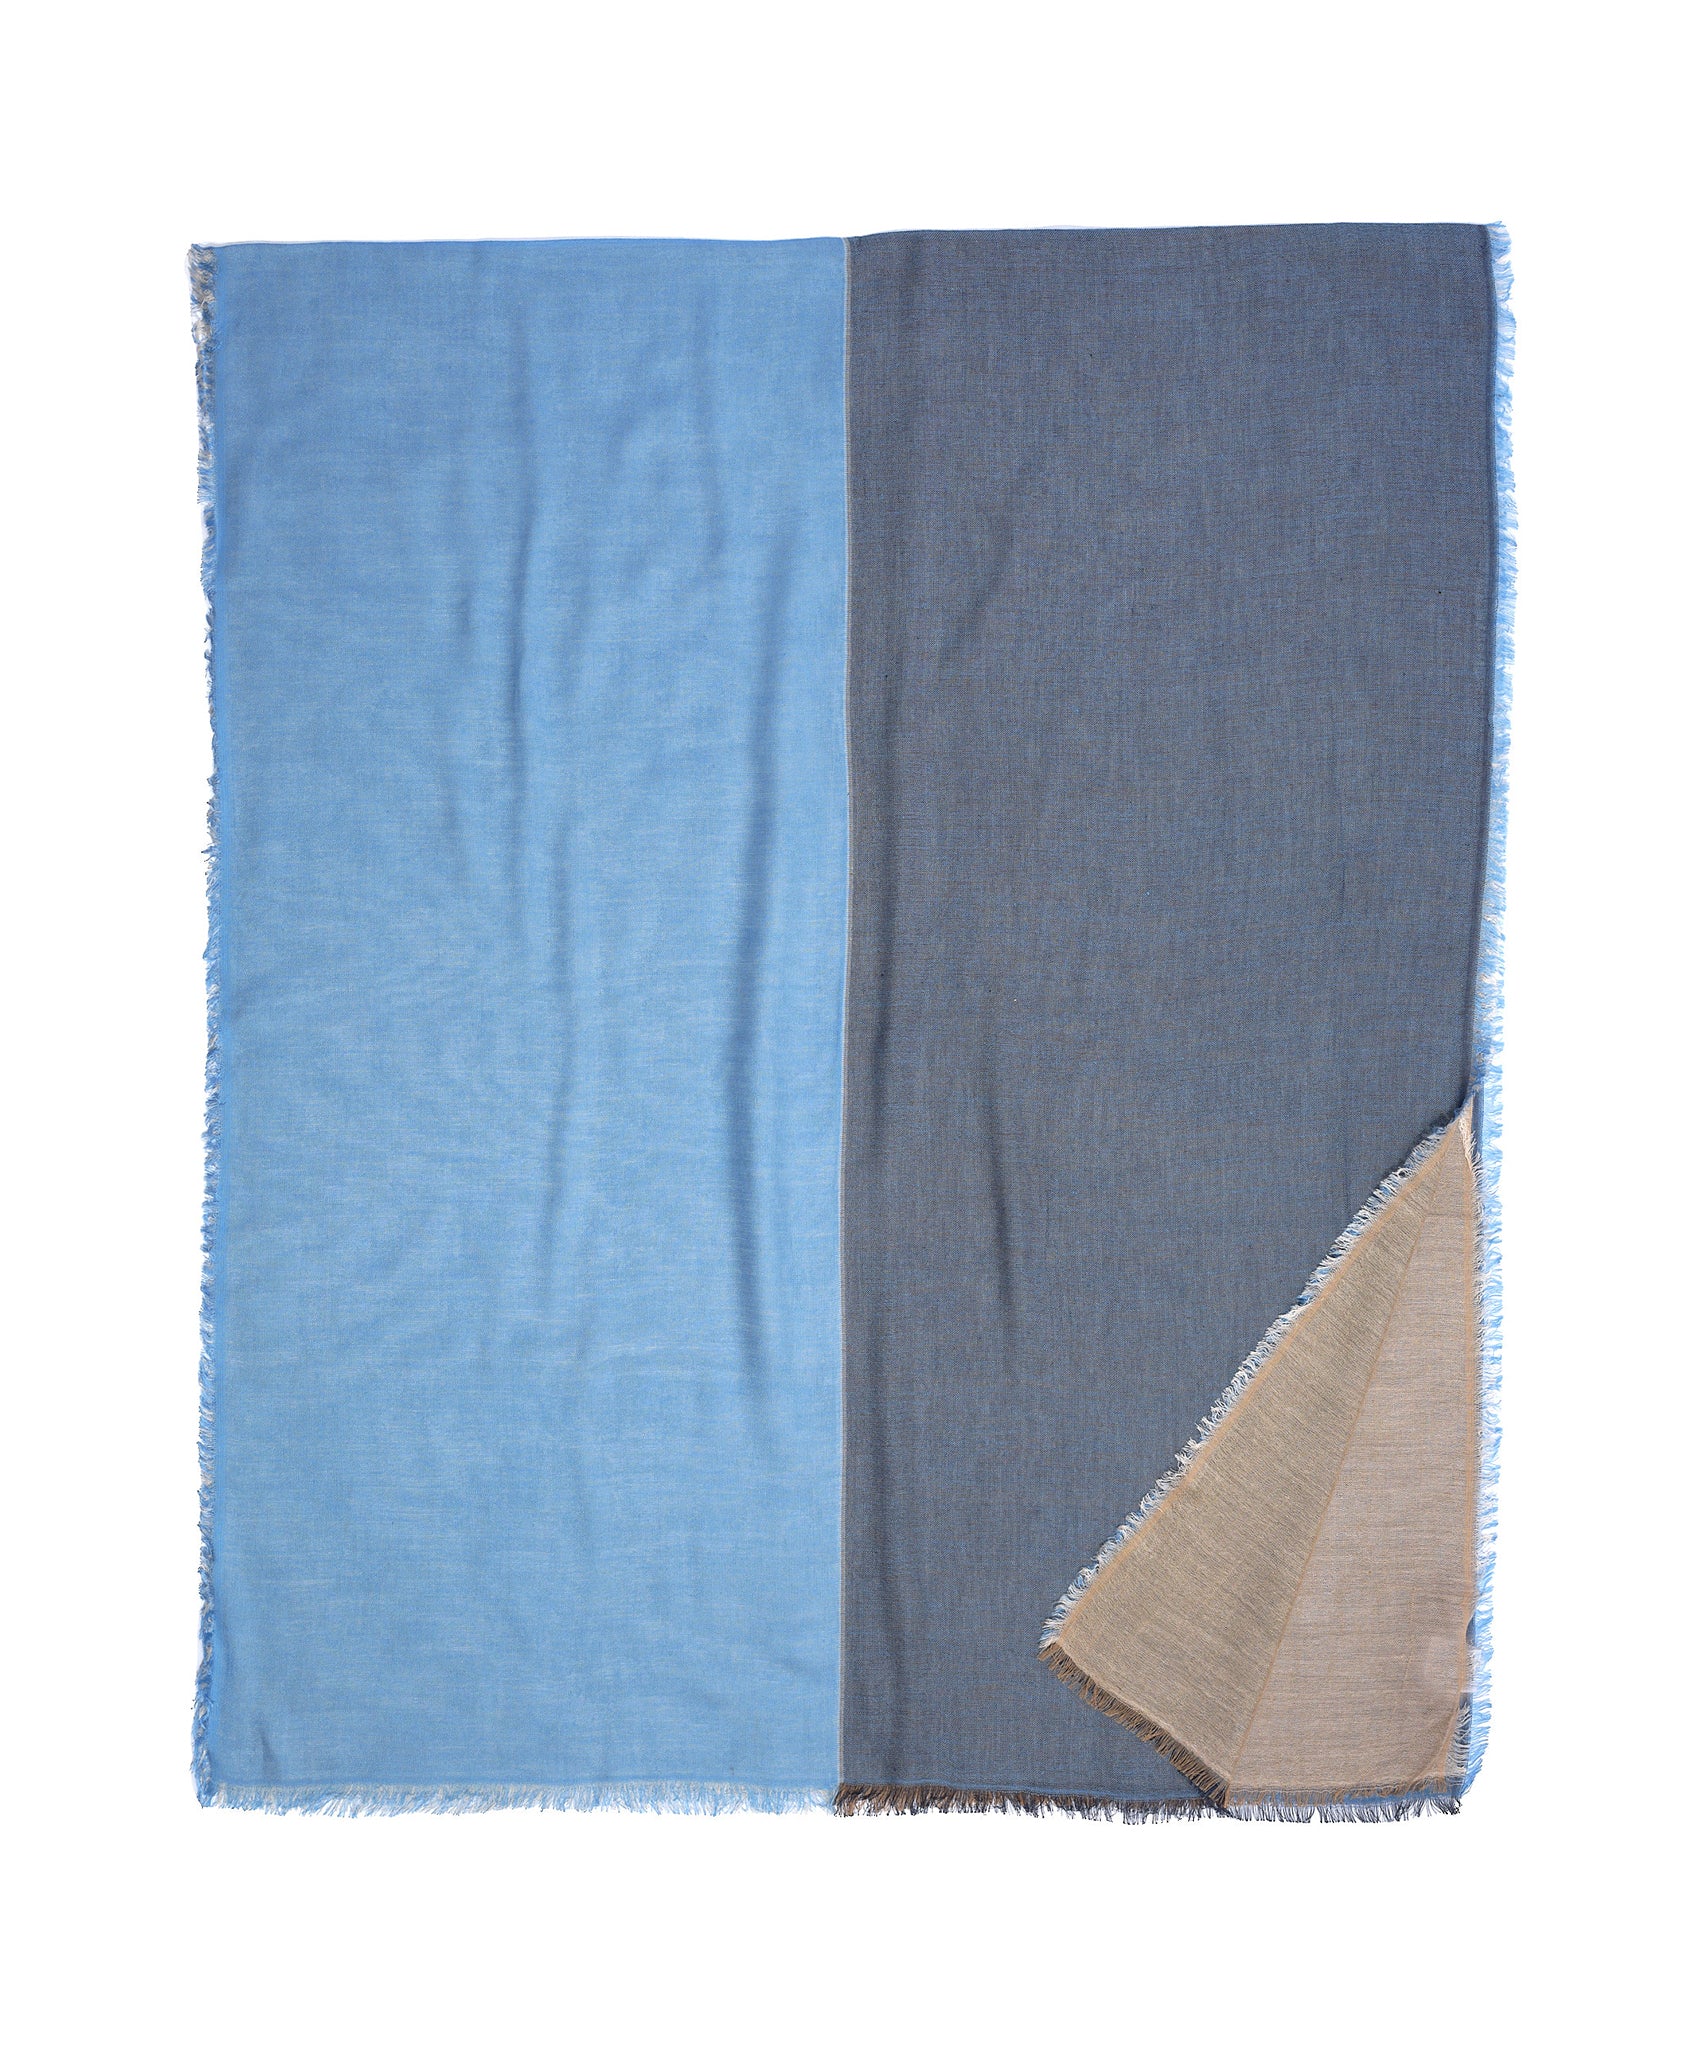 Hemisphere Wrap in color Chambray